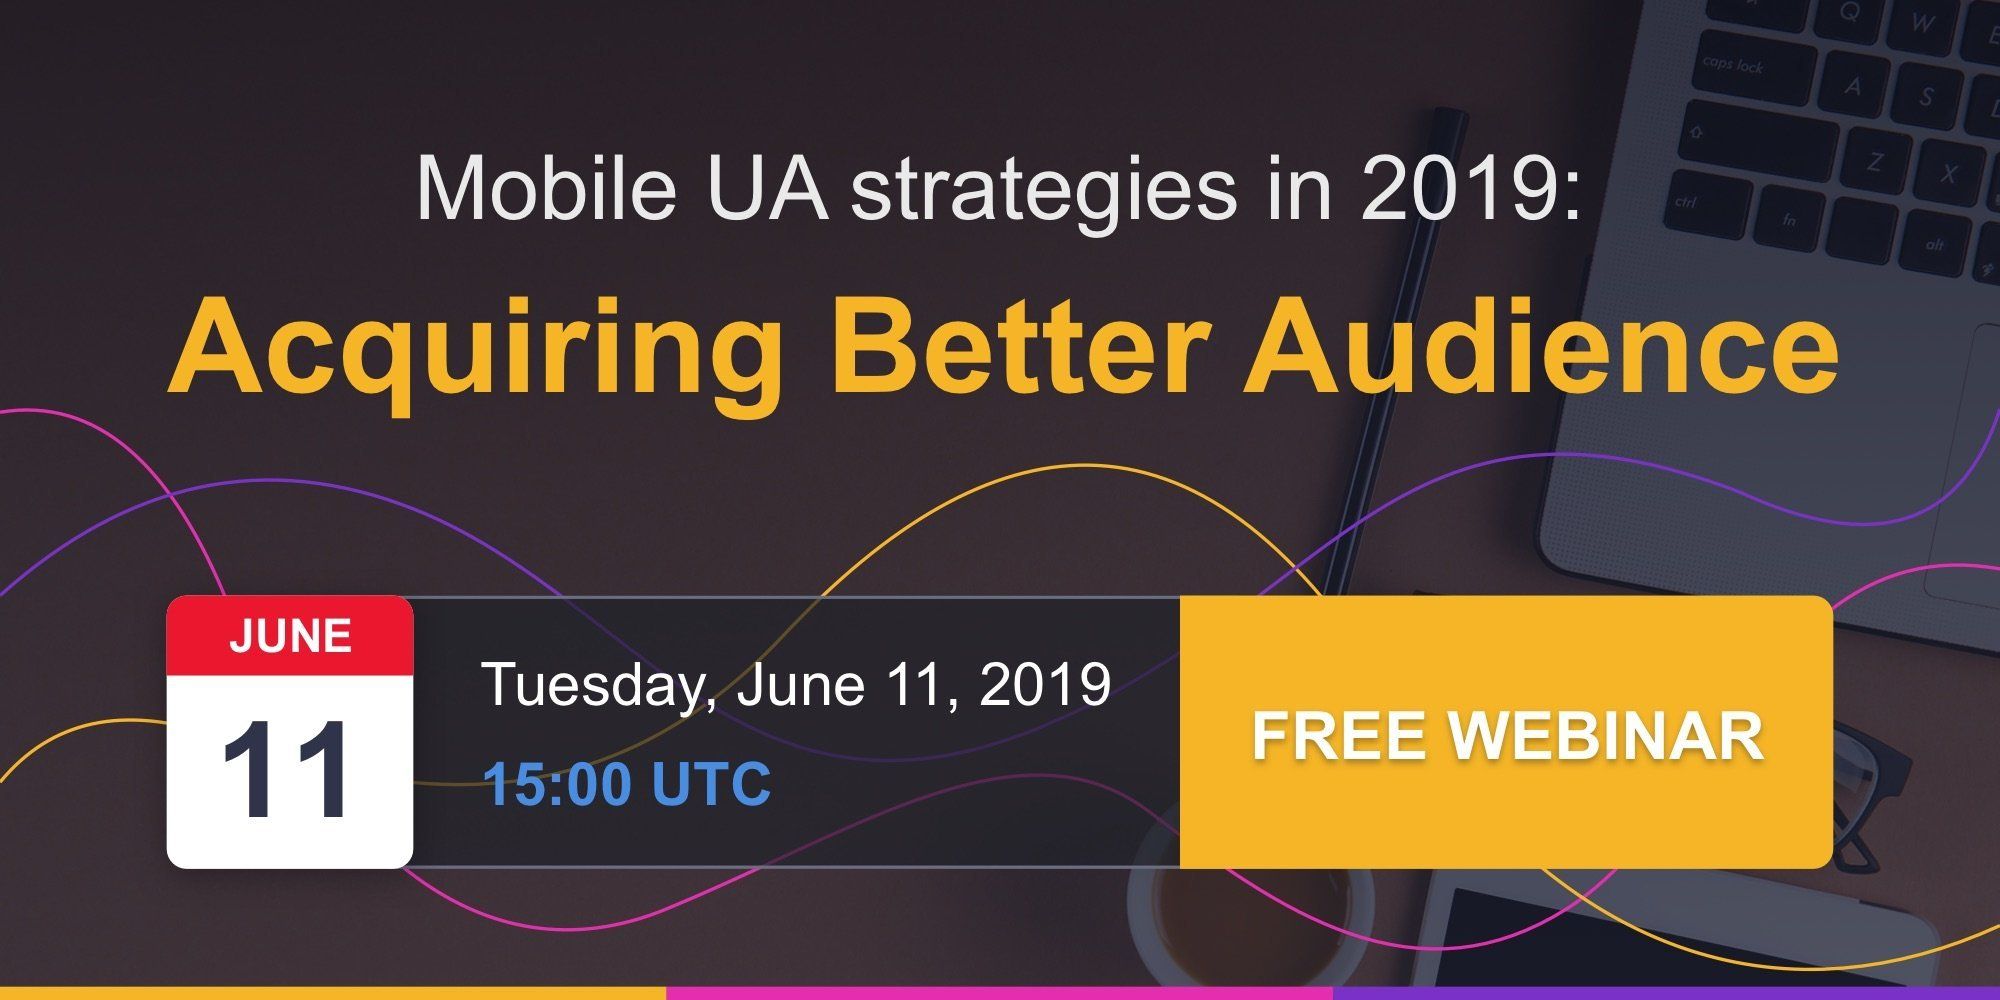 Mobile UA strategies in 2019: acquiring better audience